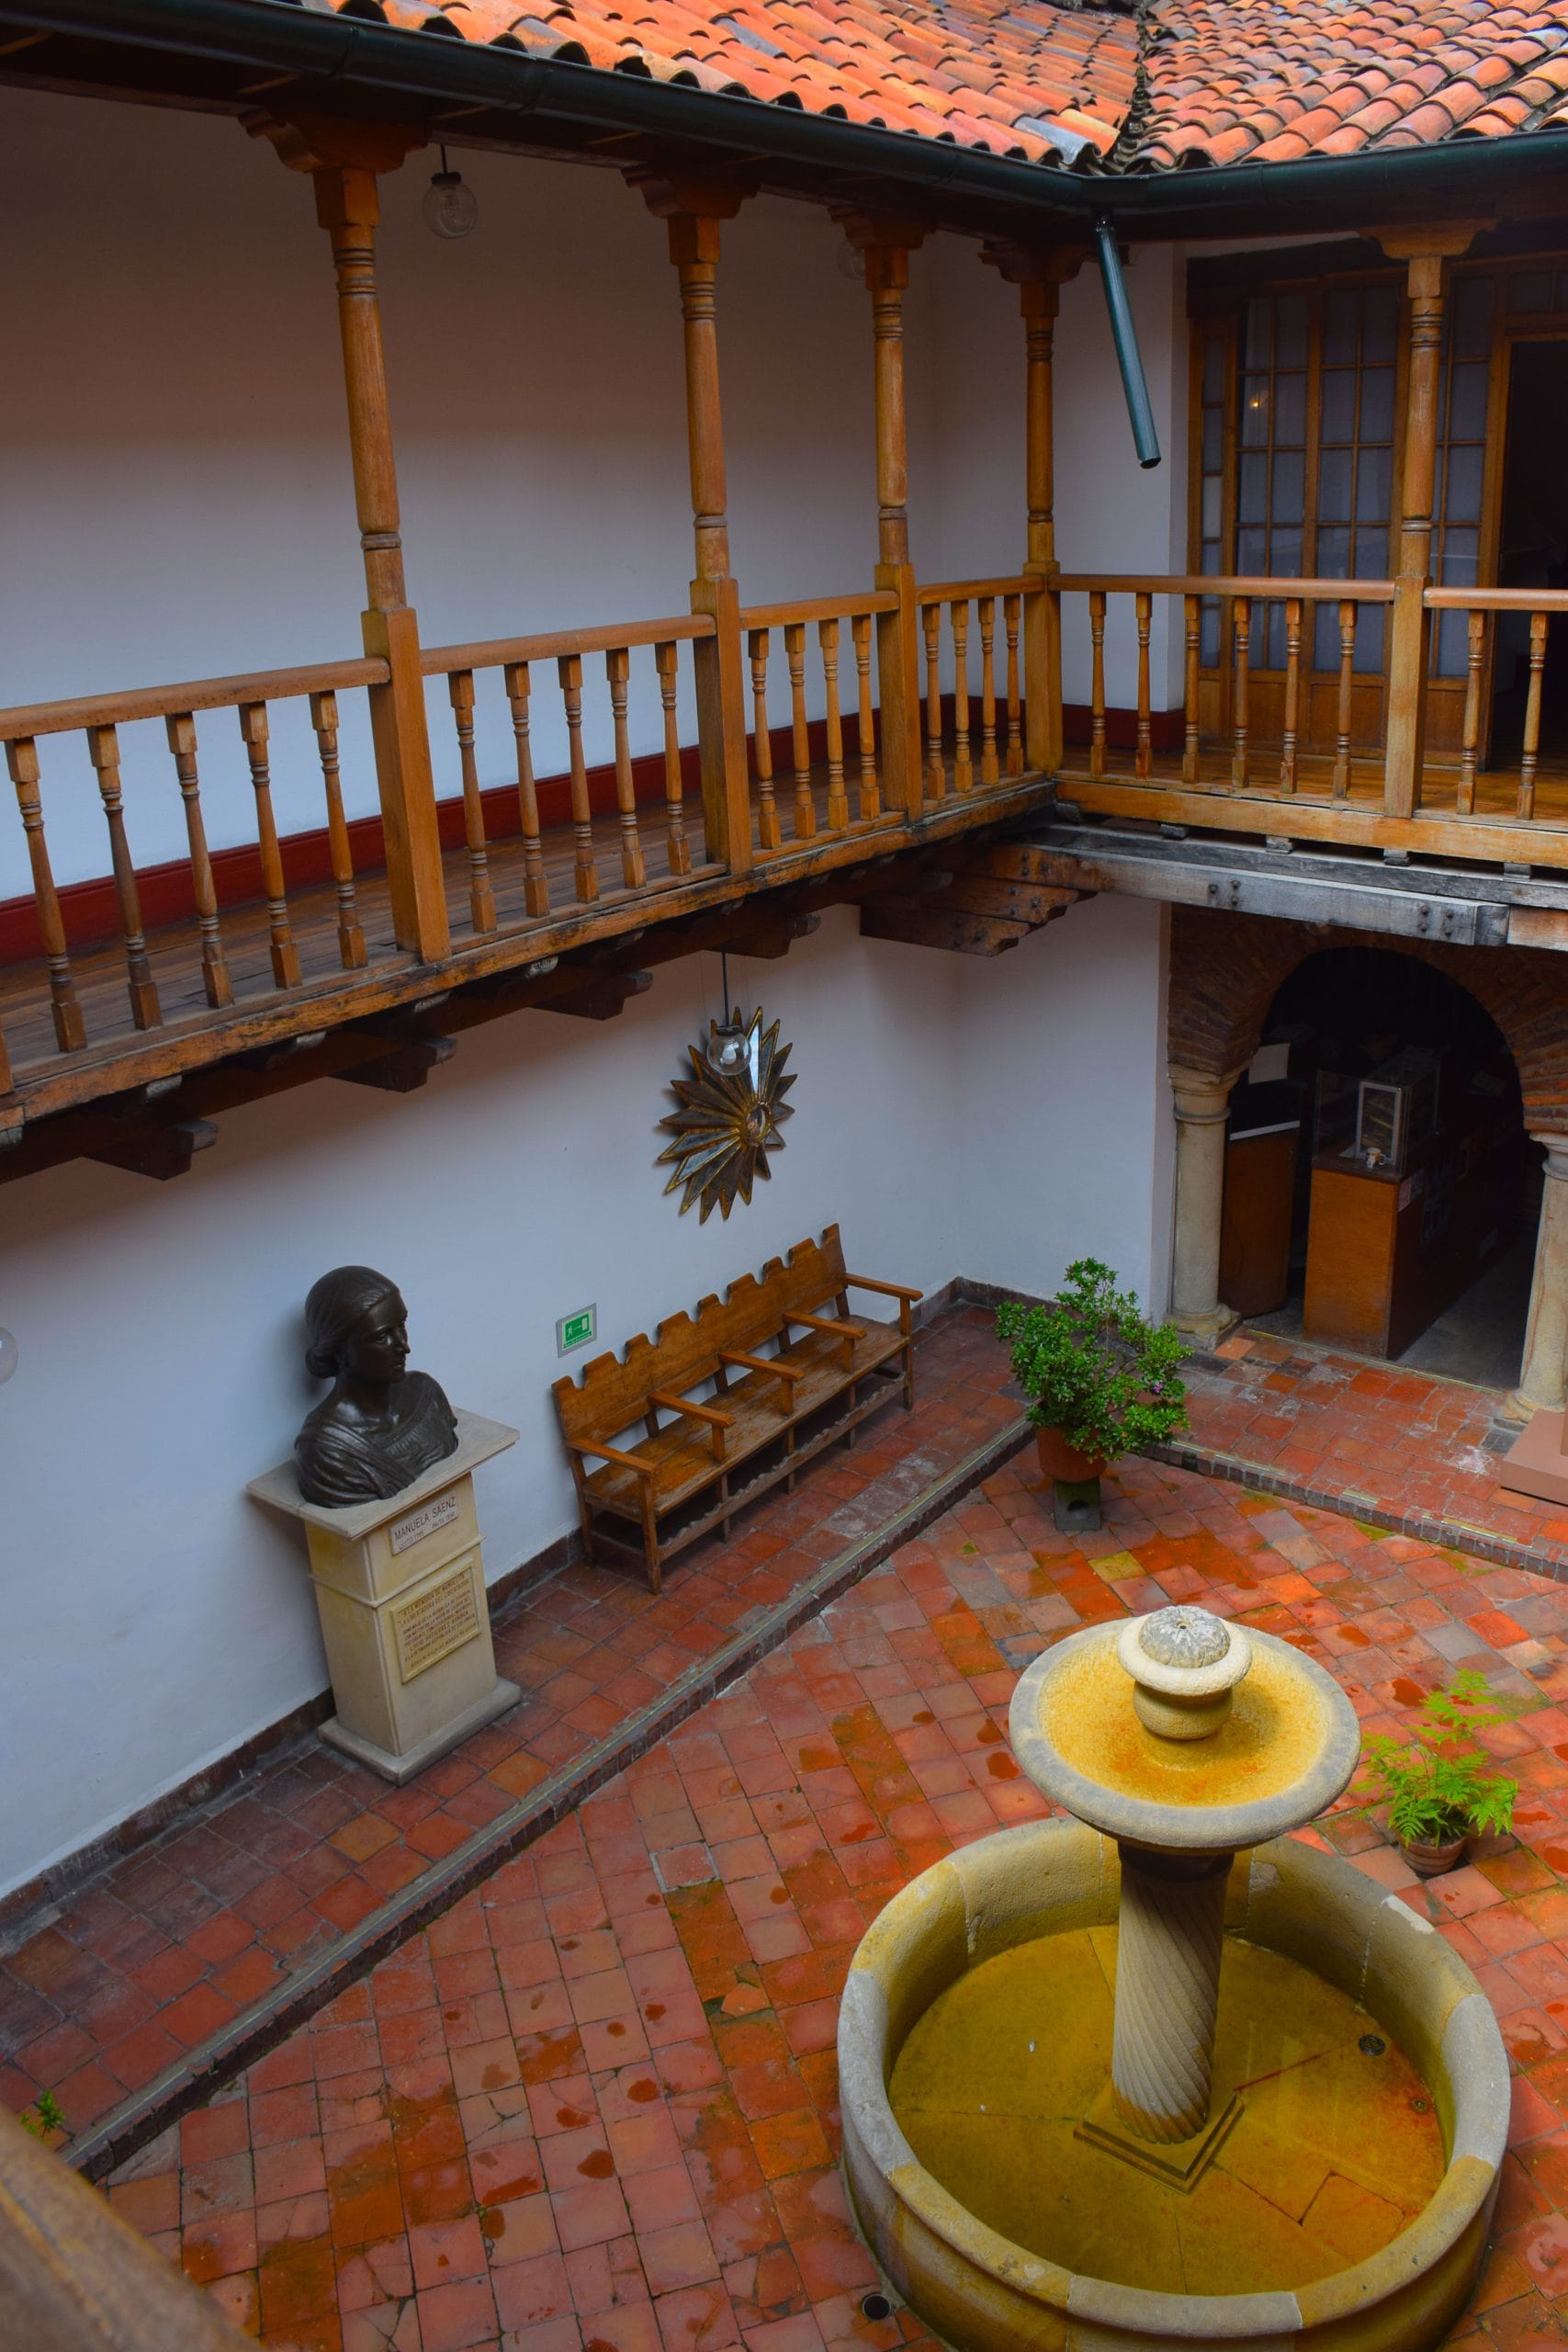 Home of Manuela Saenz in Bogota, now the Textile Museum